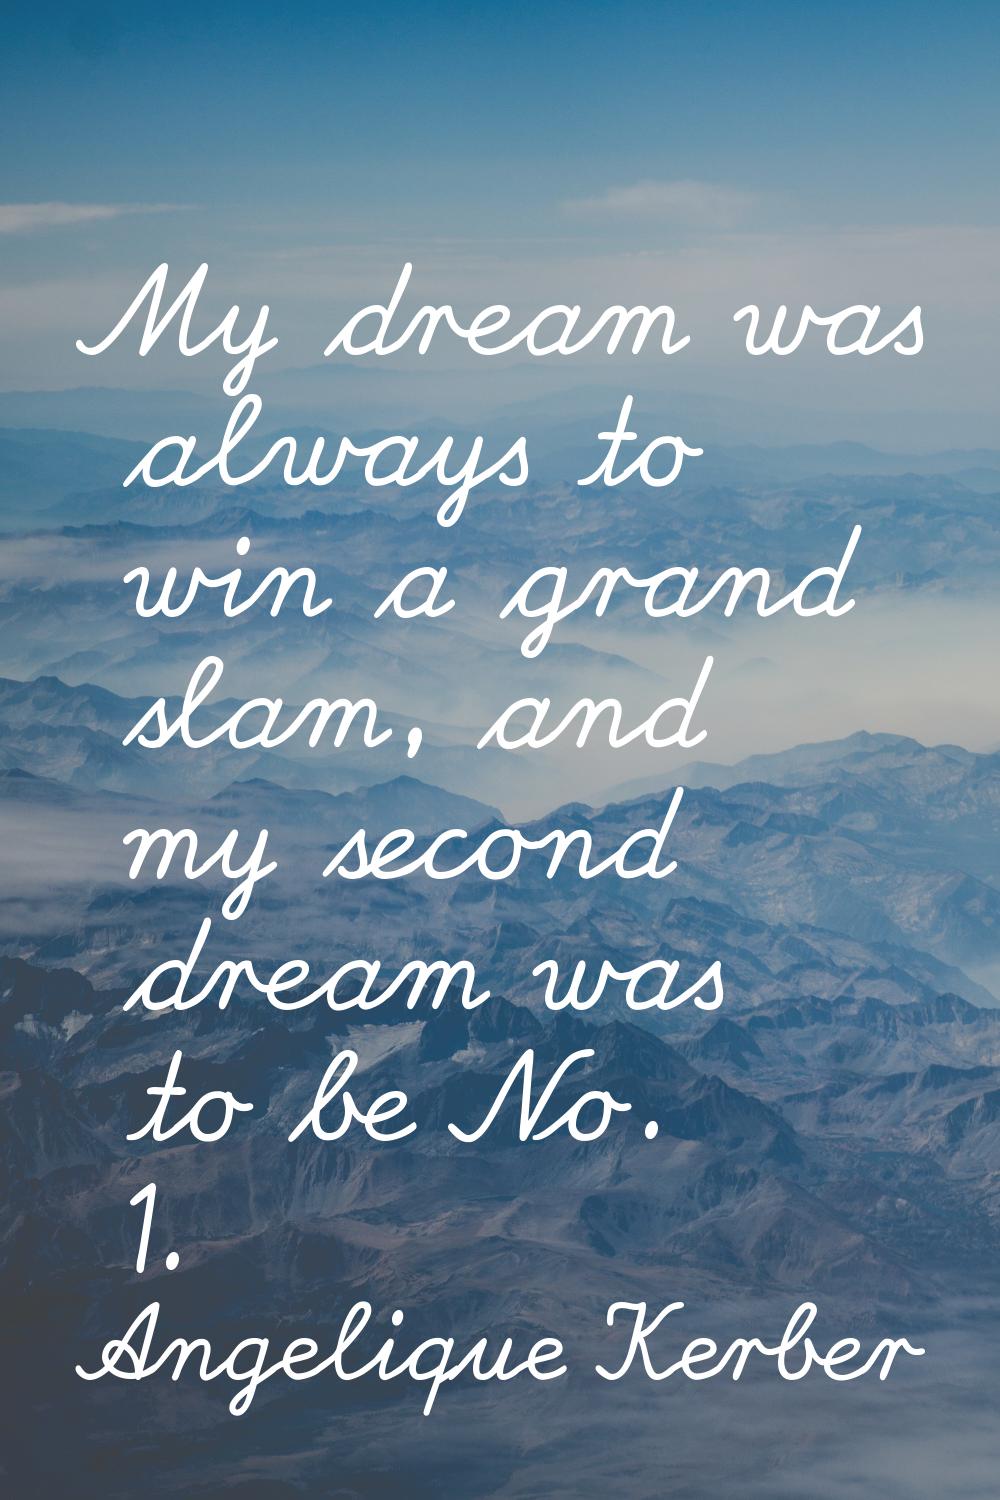 My dream was always to win a grand slam, and my second dream was to be No. 1.